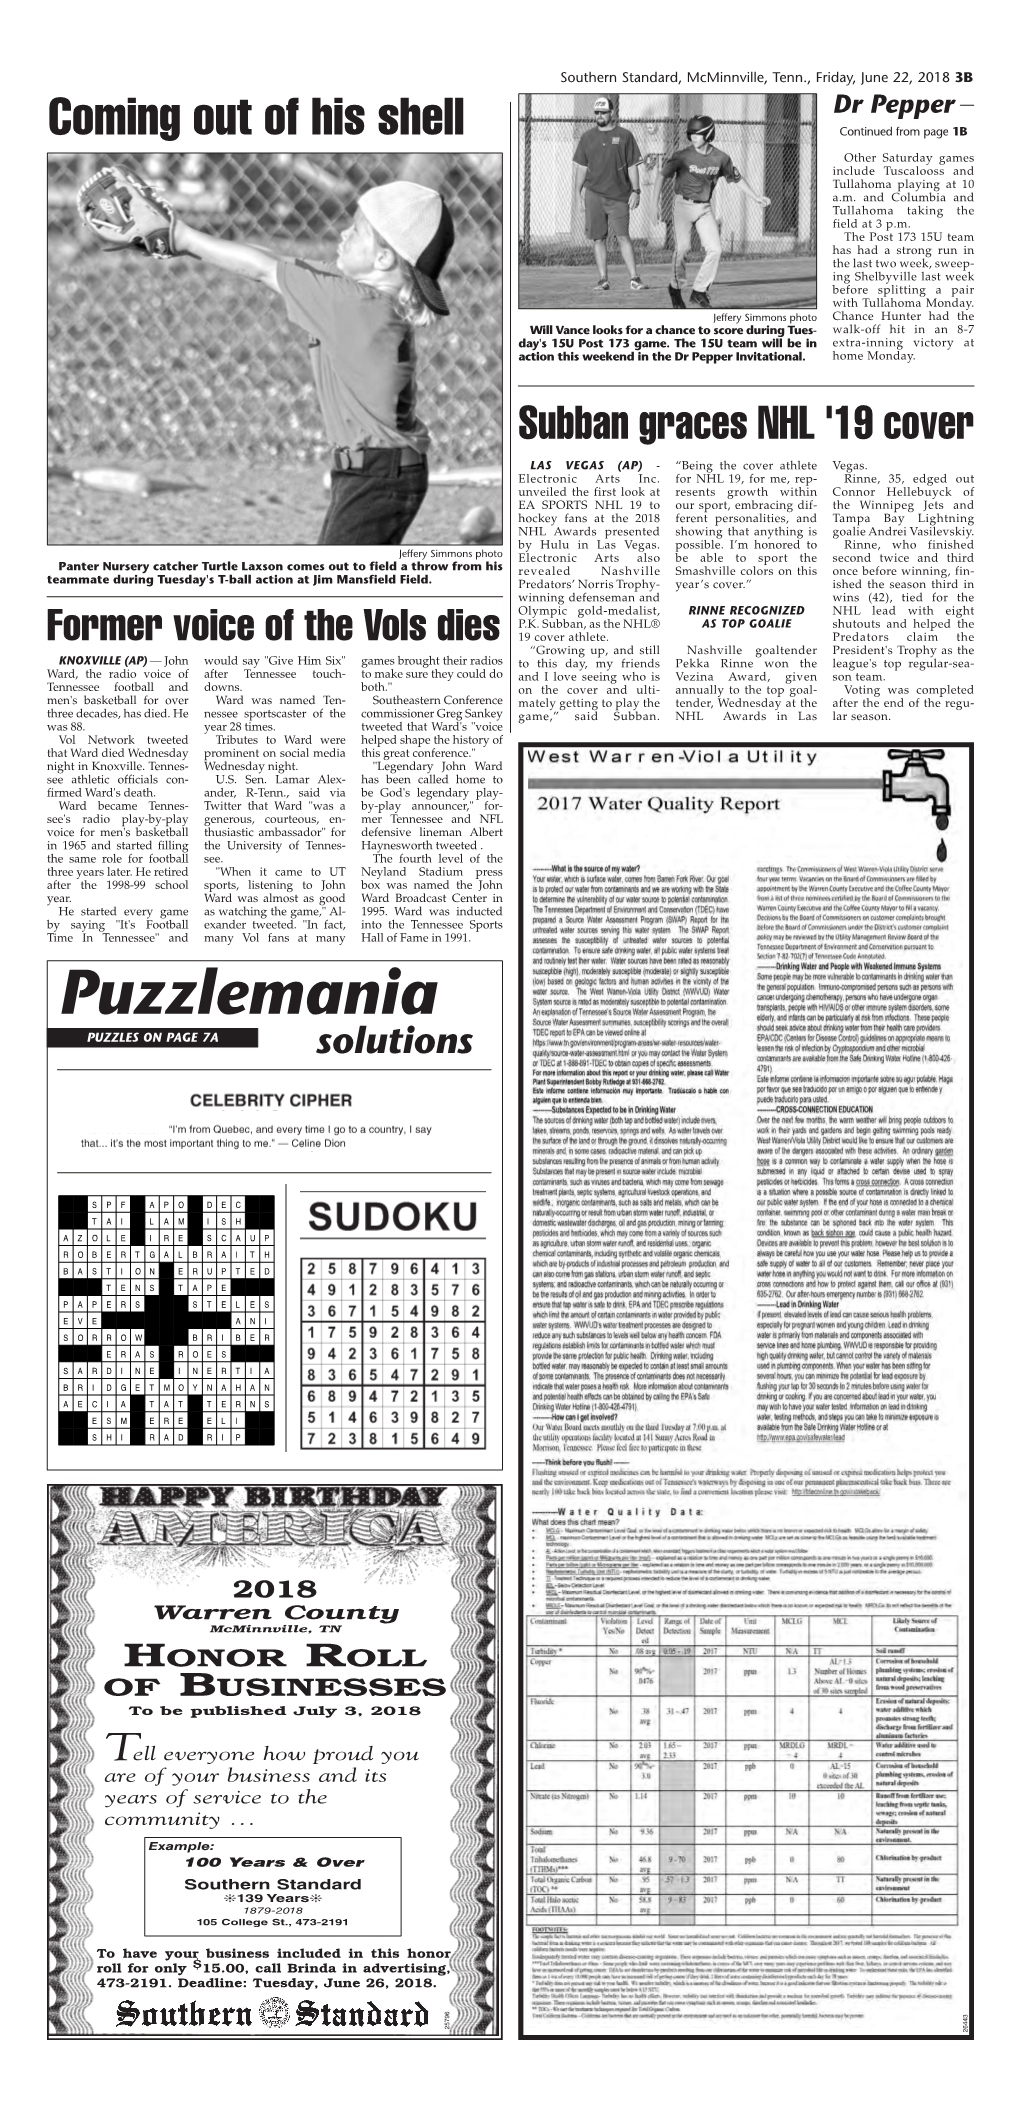 Puzzlemania PUZZLES on PAGE 7A Solutions